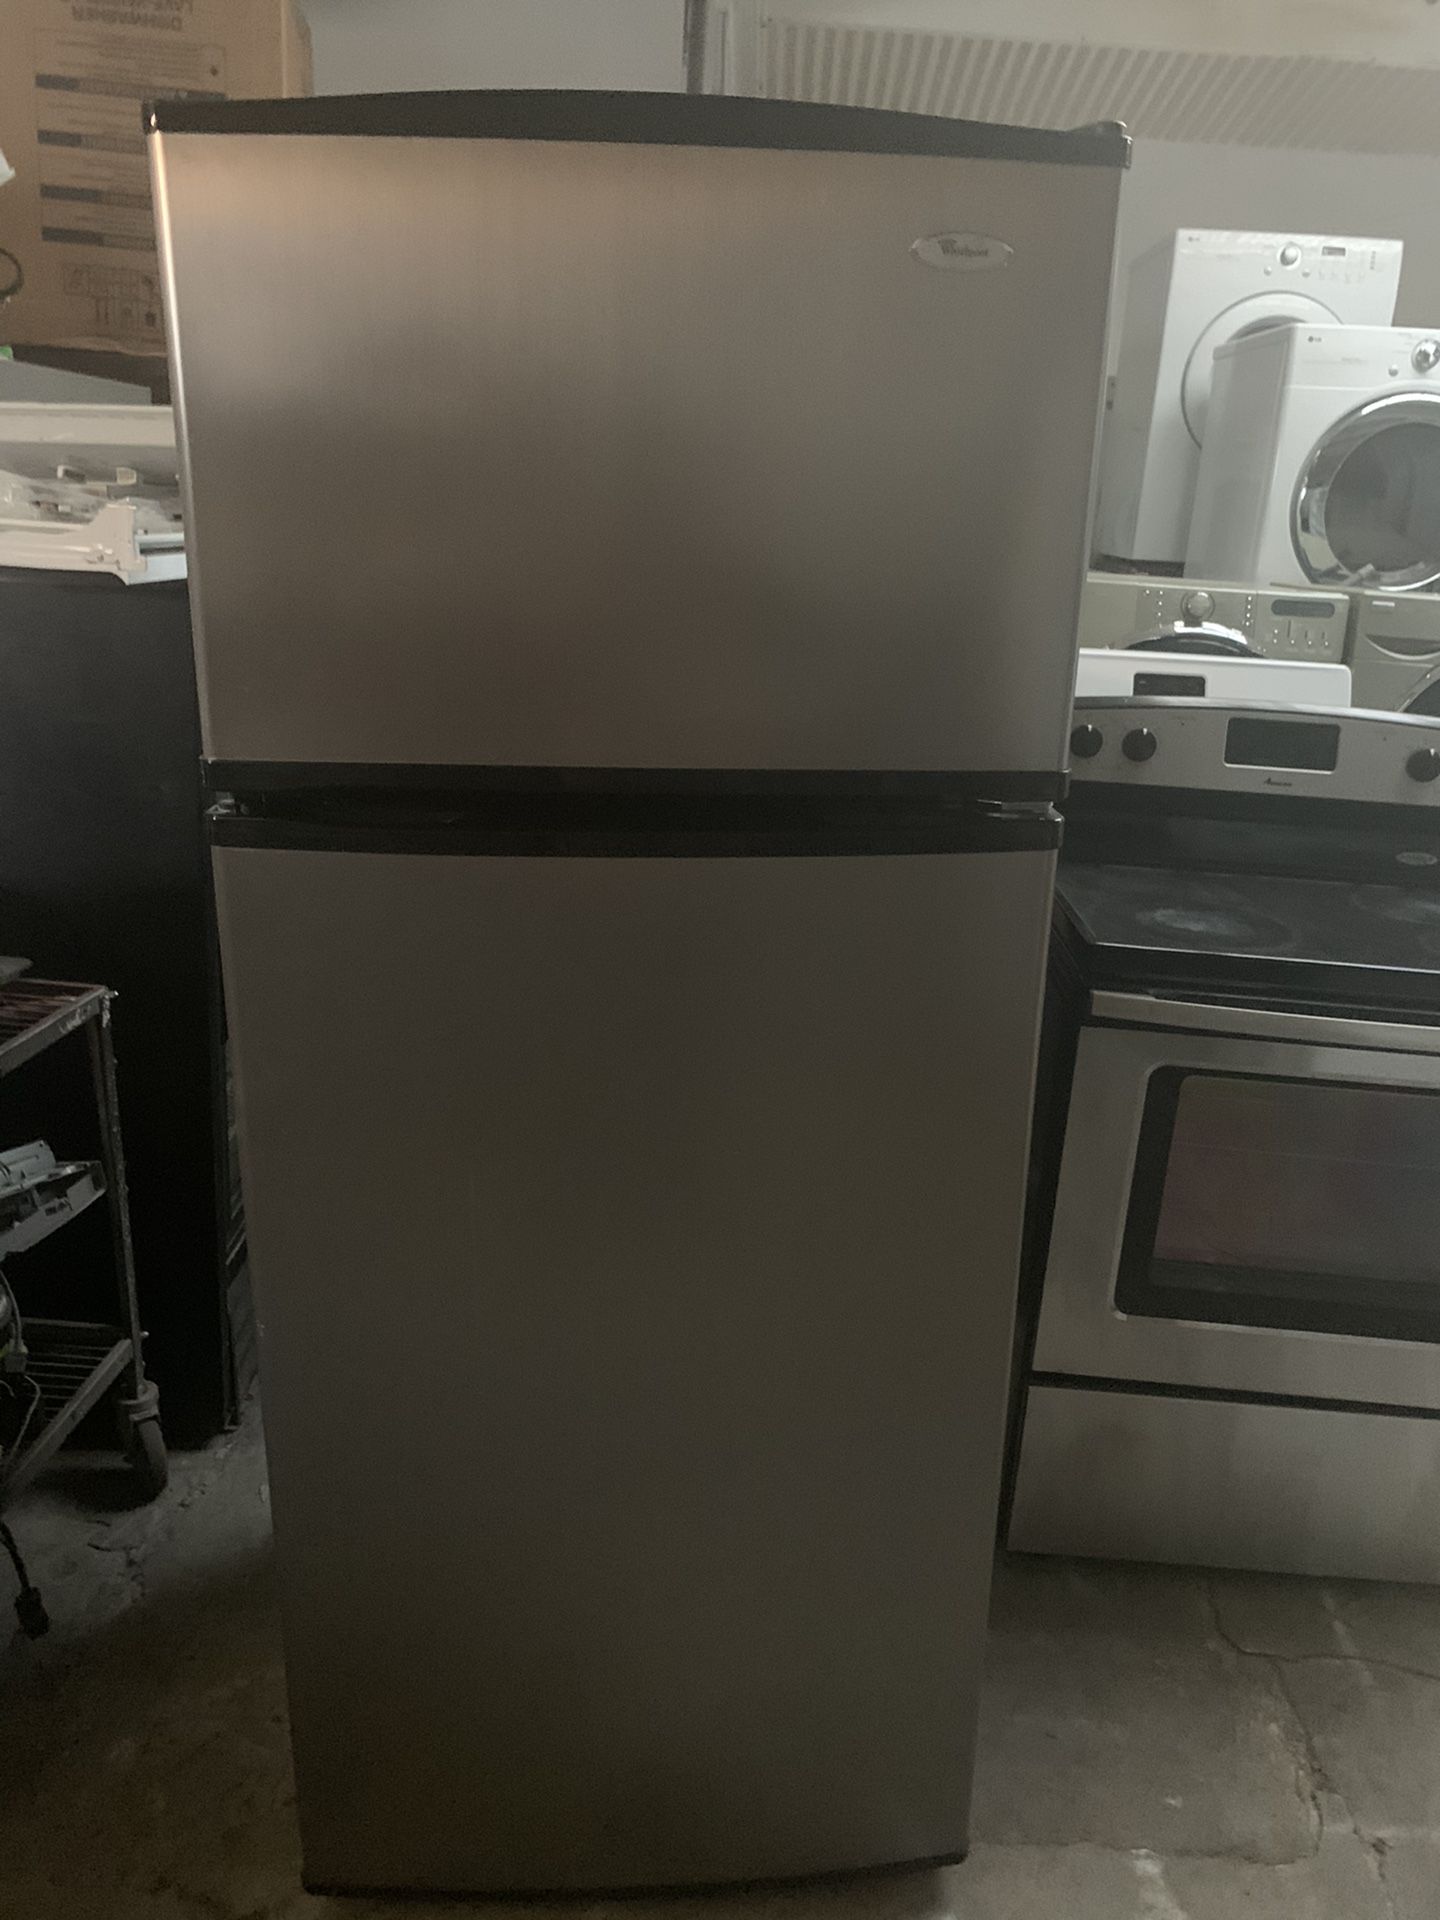 Refrigerator brand whirlpool everything is good working condition 90 days warranty delivery and installation